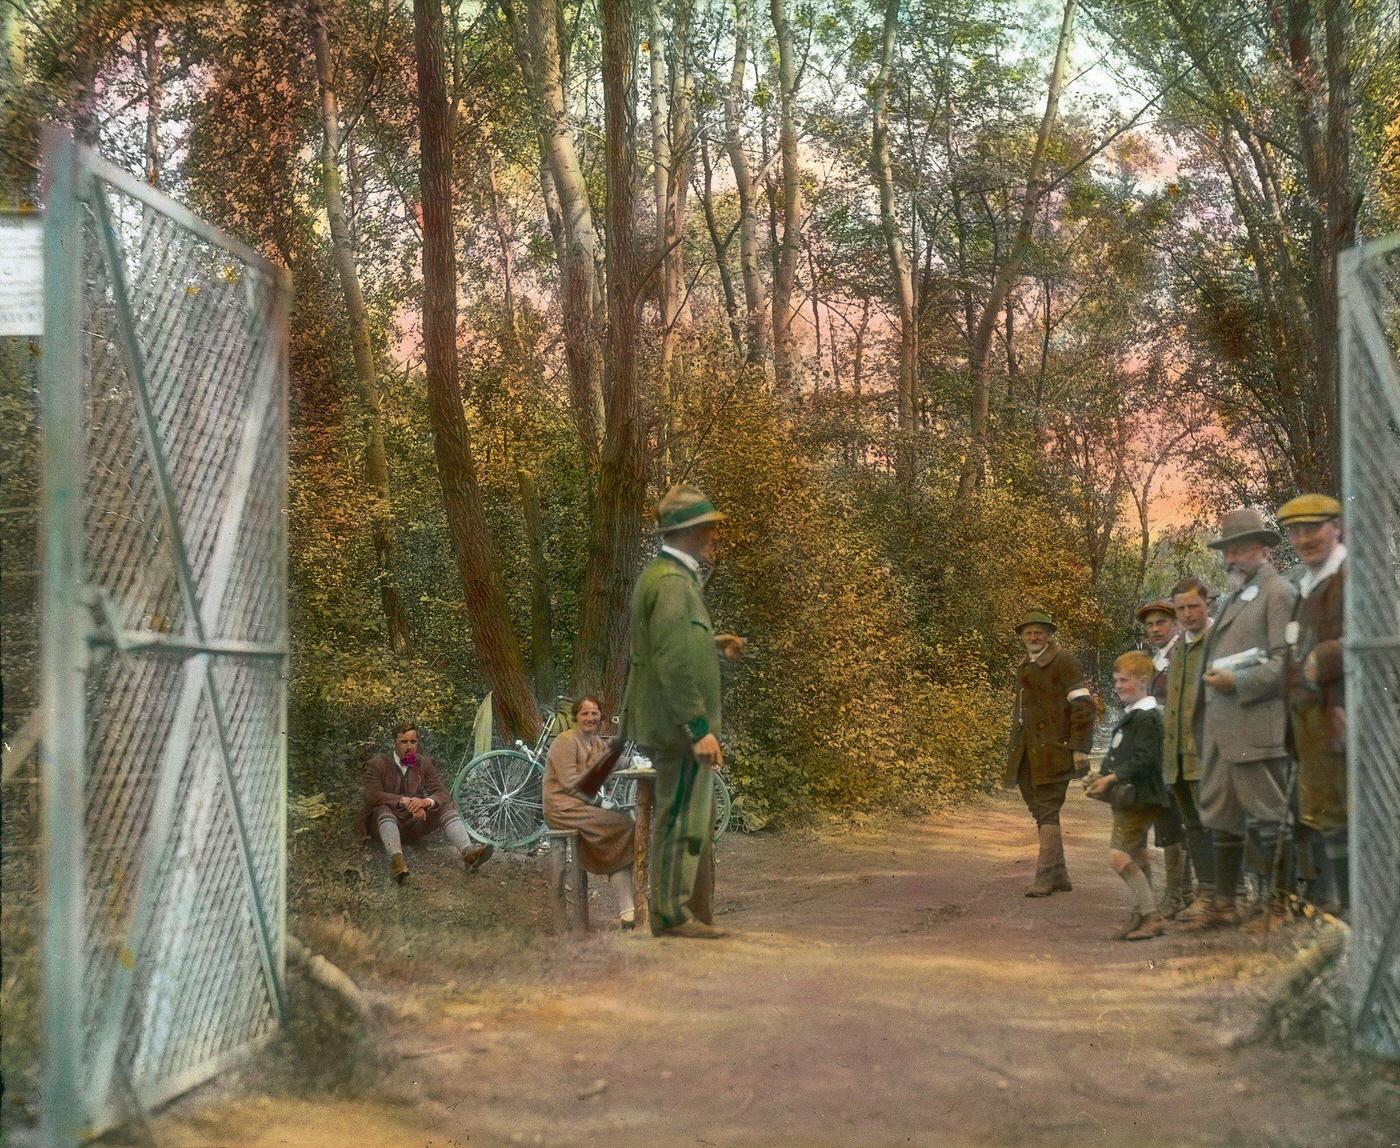 Entrance to the Lobau nature reserve, now part of the Danube-Auen National Park, 1905.